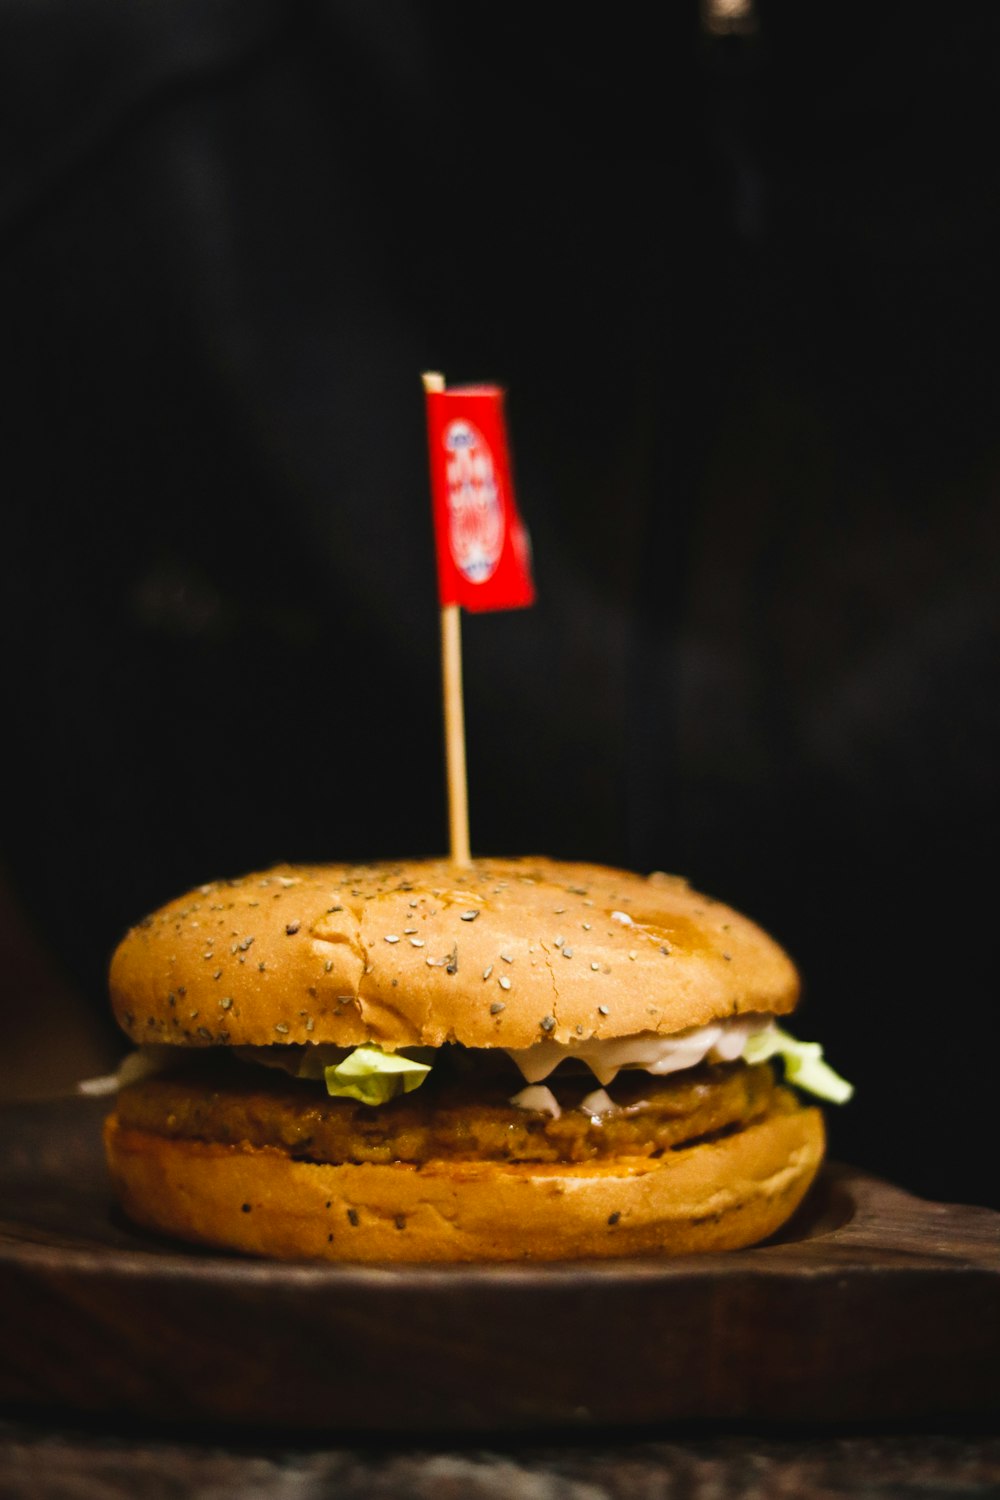 hamburger on wooden surface with small flag